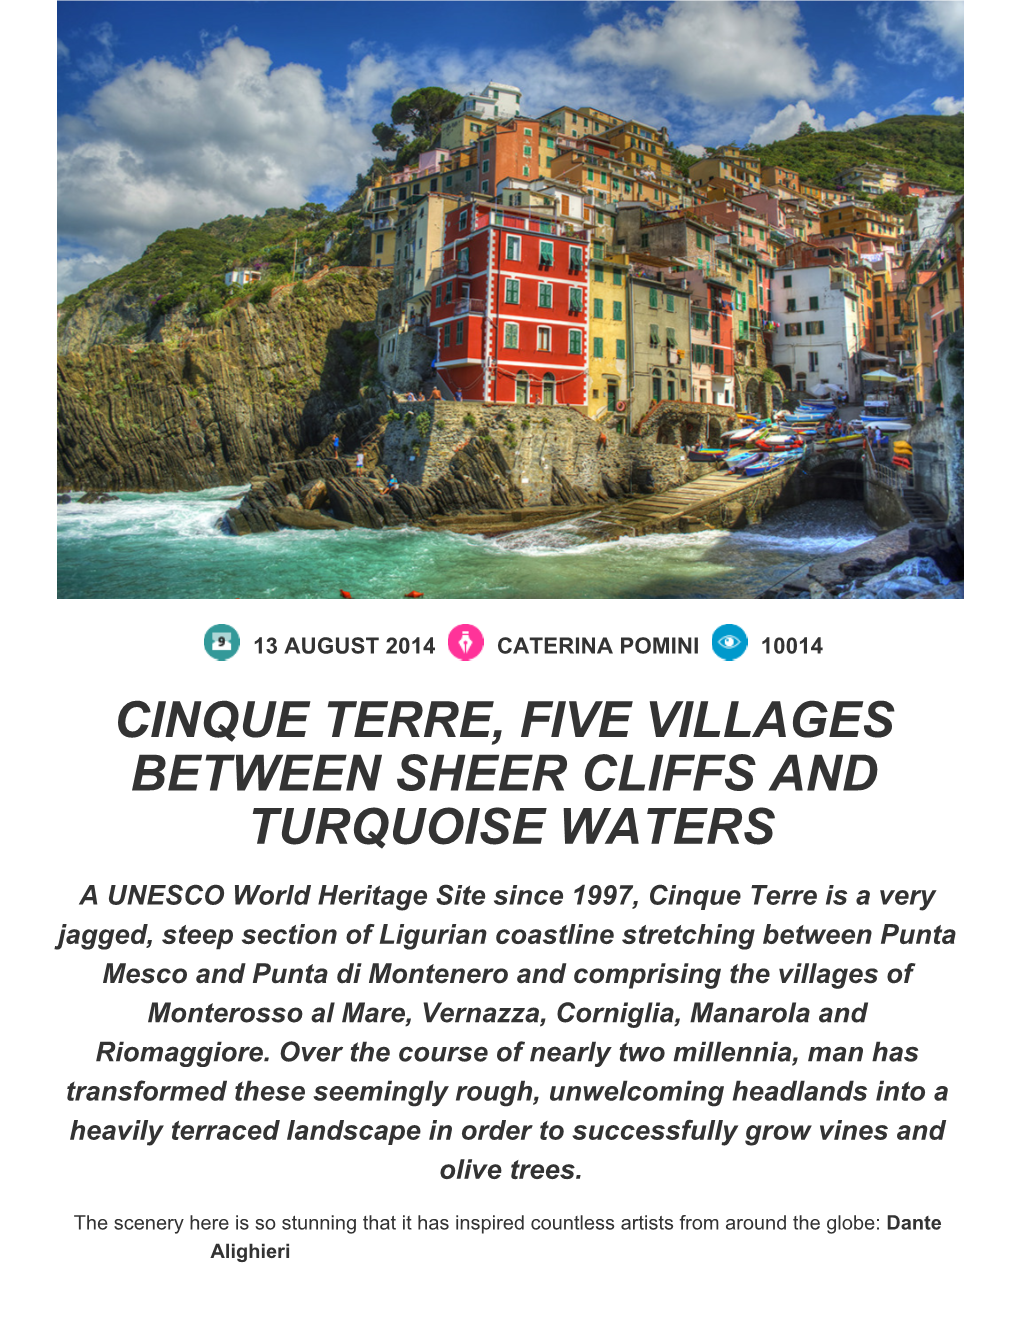 Cinque Terre, Five Villages Between Sheer Cliffs and Turquoise Waters